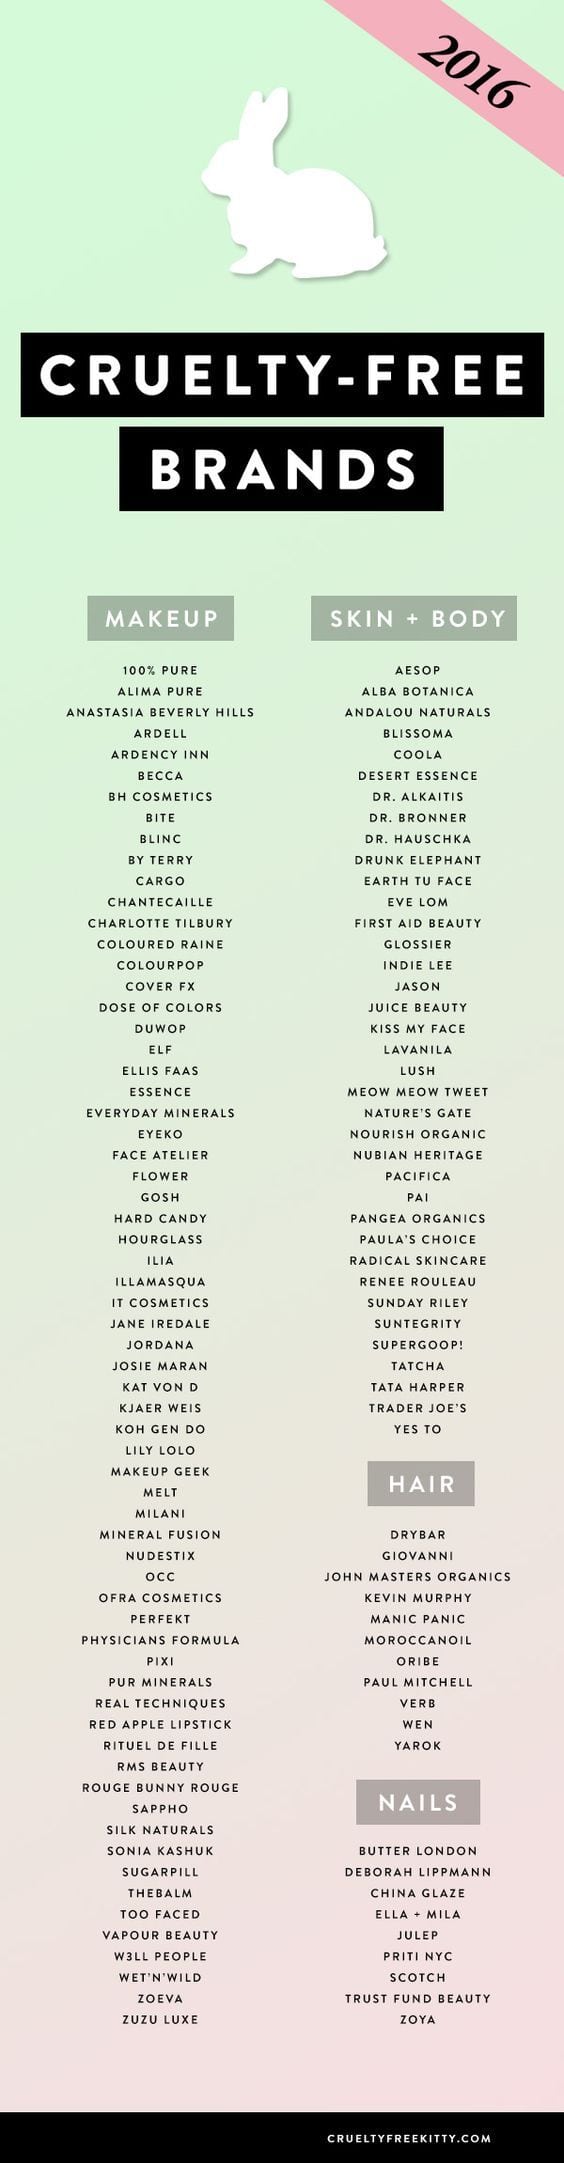 [ad_1]

Cruelty-free makeup, skincare, and hair care brands! Updated 2016. #crueltyfree:
Source by aliabien
[ad_2]
			
			…